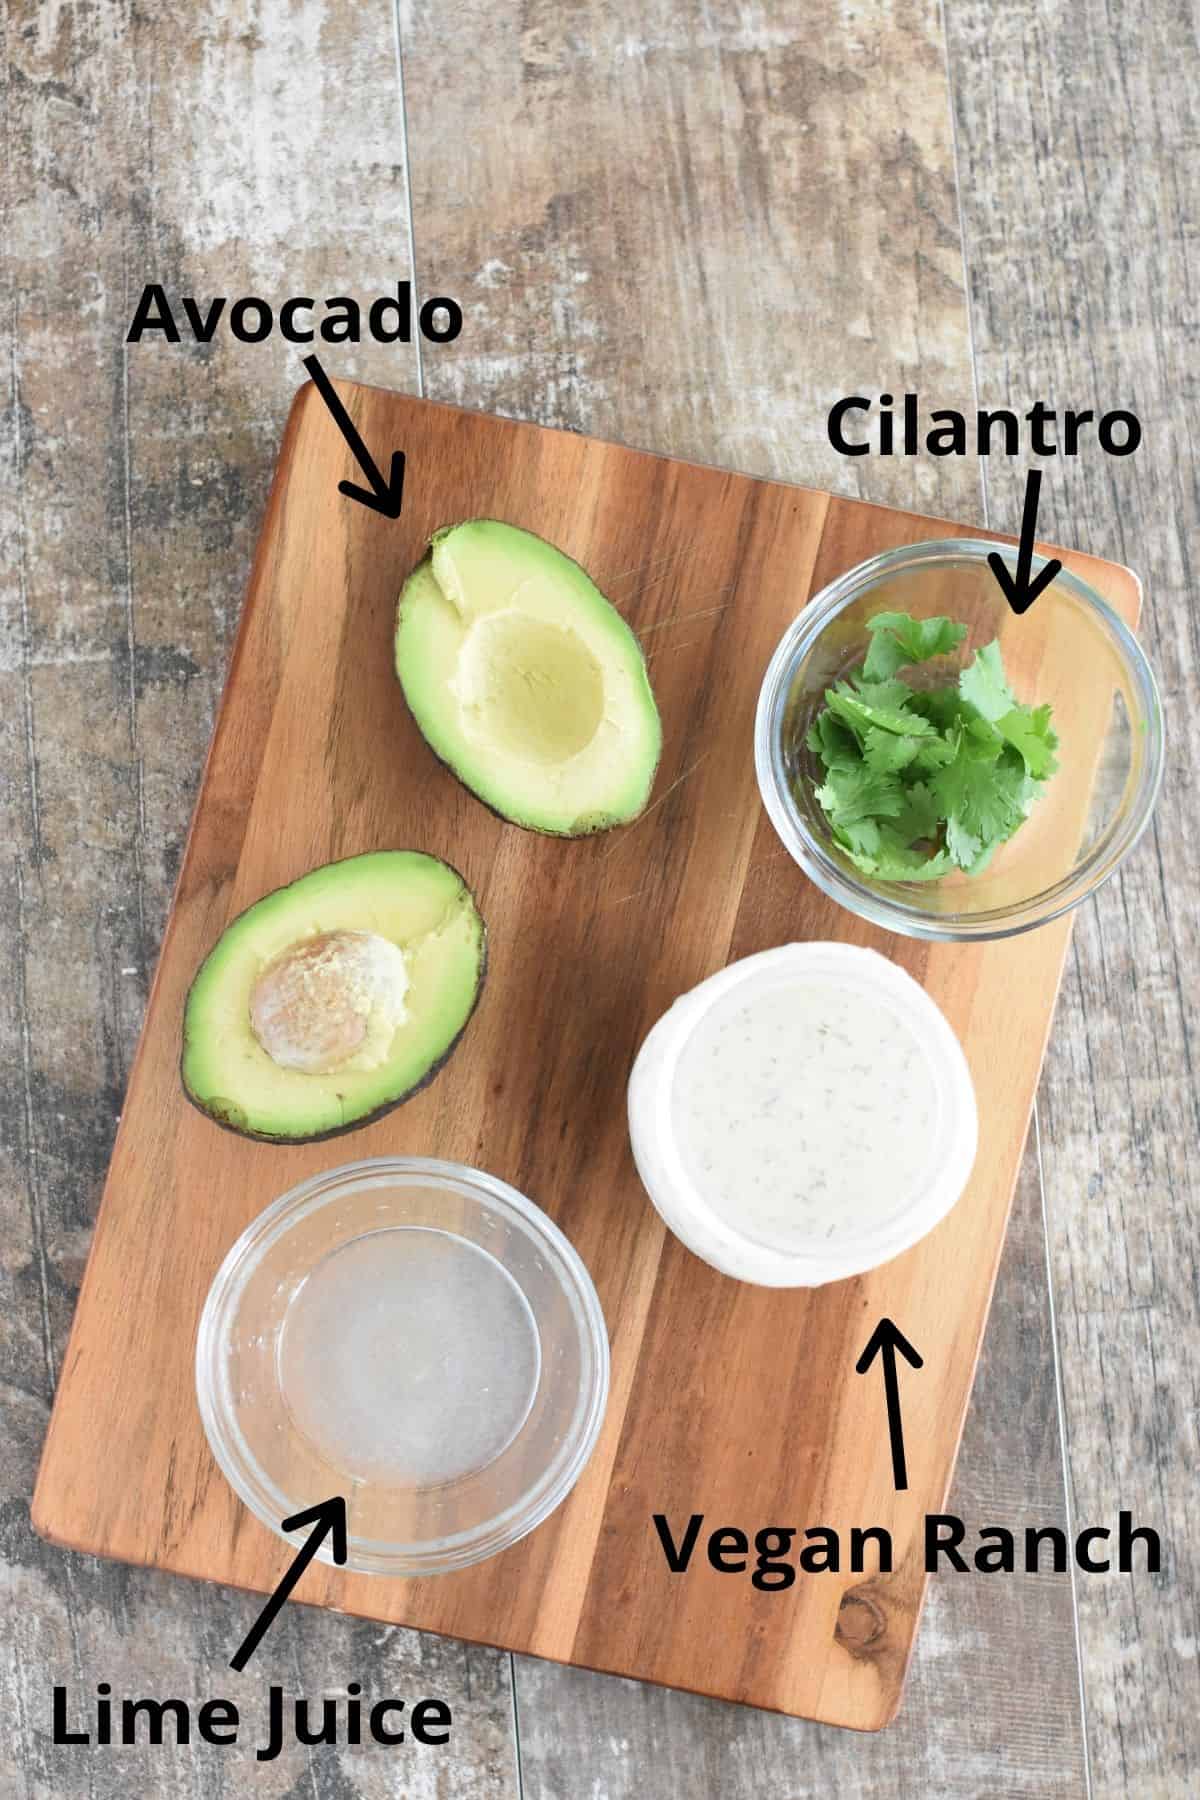 ingredients on wooden board and labeled 